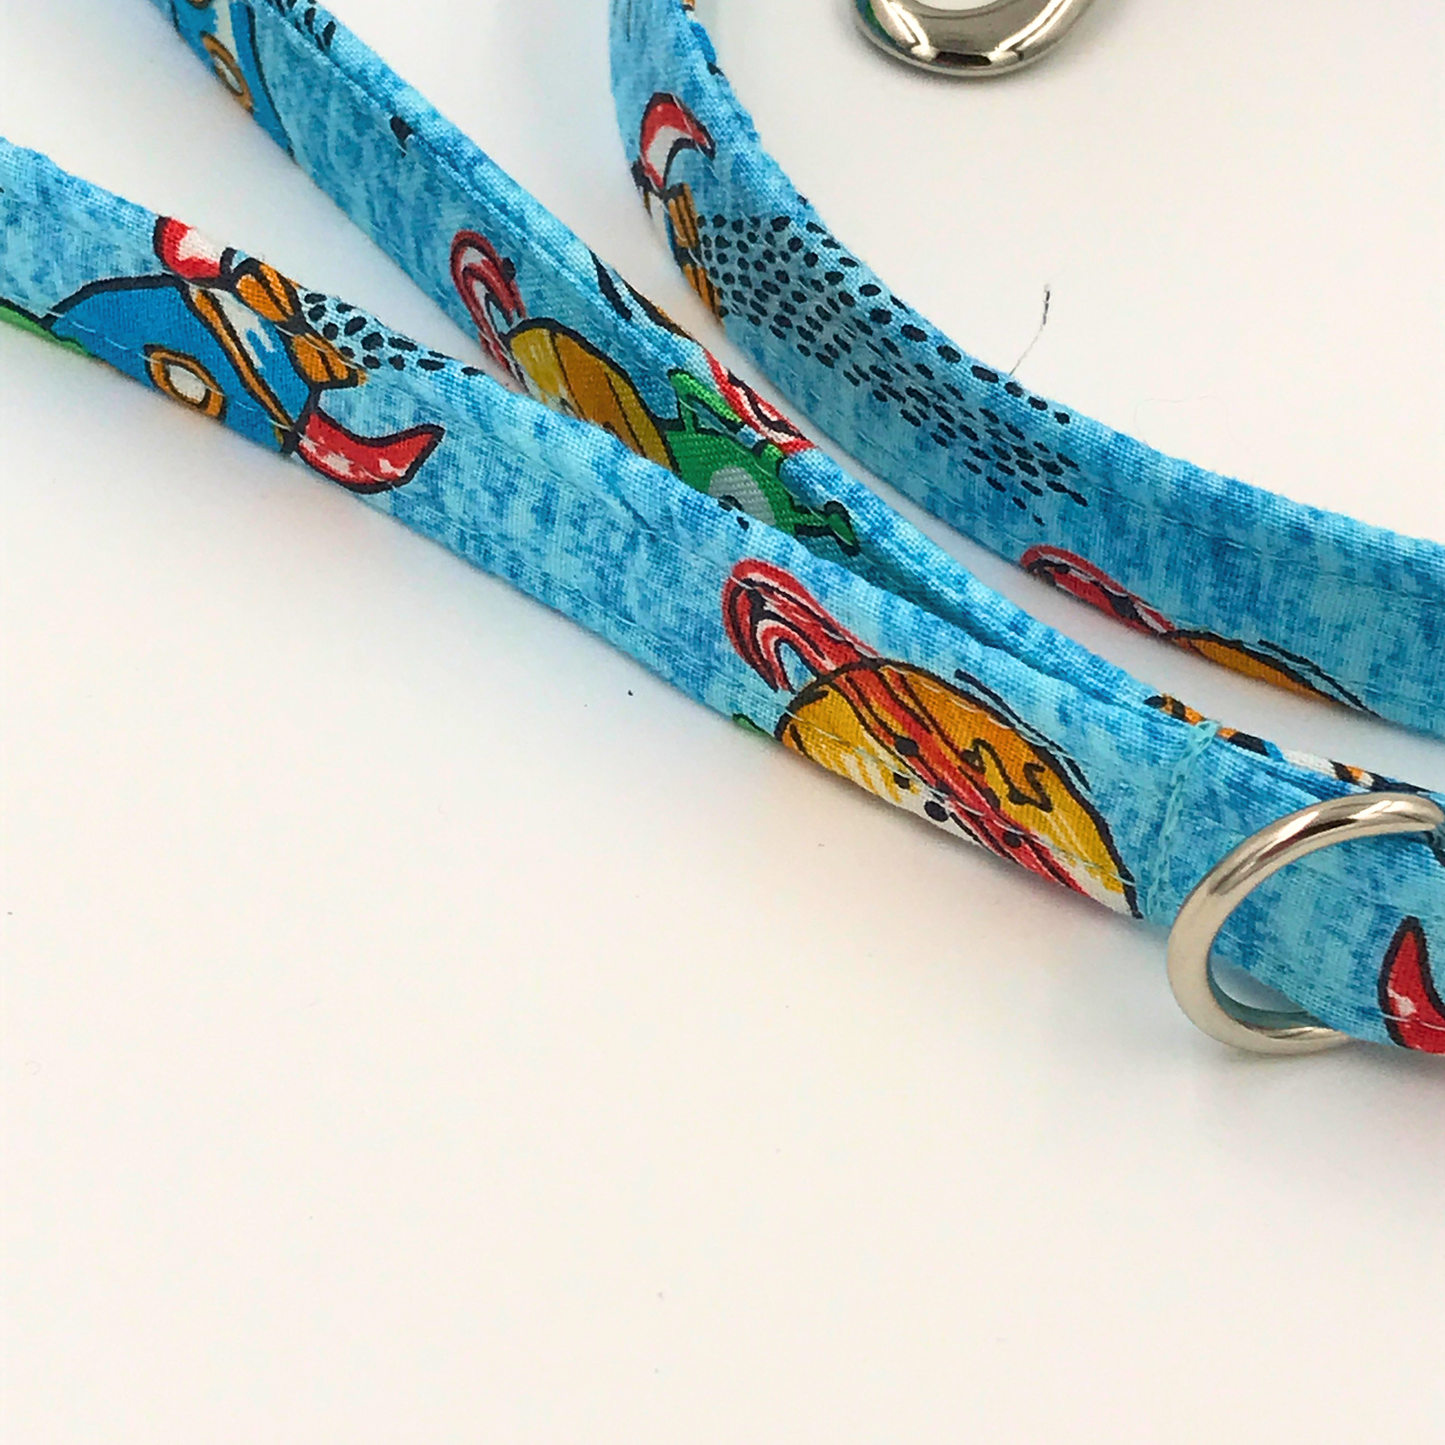 Puppy or cat lead / leash - fabric covered webbing